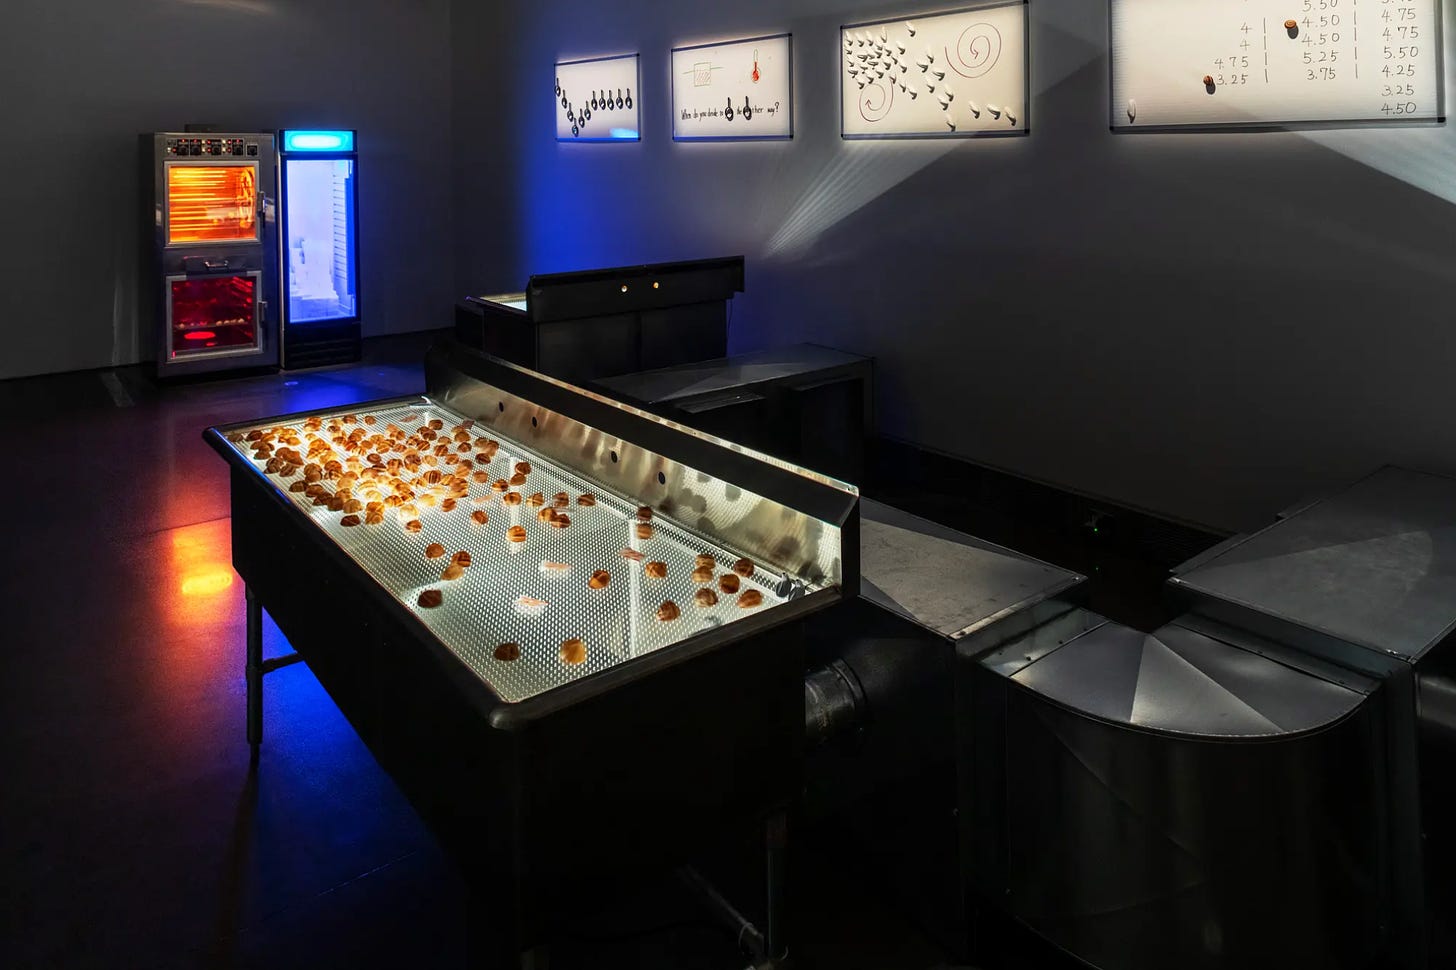 Installation view of Aki Sasamoto Point Reflection. In a darkened room, and industrial sink has a lit surface of perforated glass, supporting random groupings of large empty snail shells. In the back of the room is an industrial rotisserie machine, glowing orange and red, paired with a freezer glowing blue. On the wall is a series of photographs, glowing white, with diagrams, numbers, an arrays of small objects.